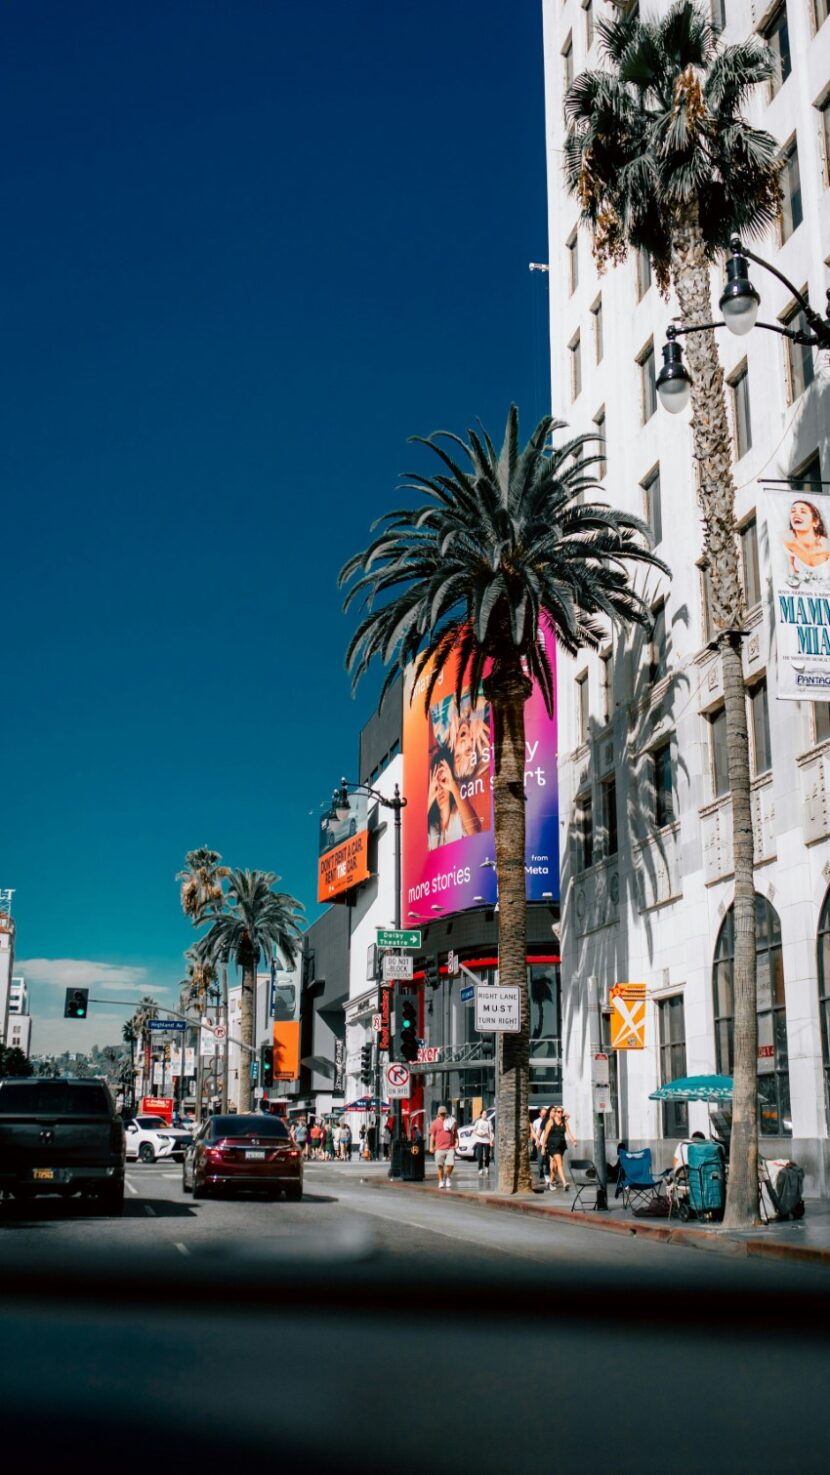 5 Things You Shouldn’t Miss When Planning a Trip to Hollywood